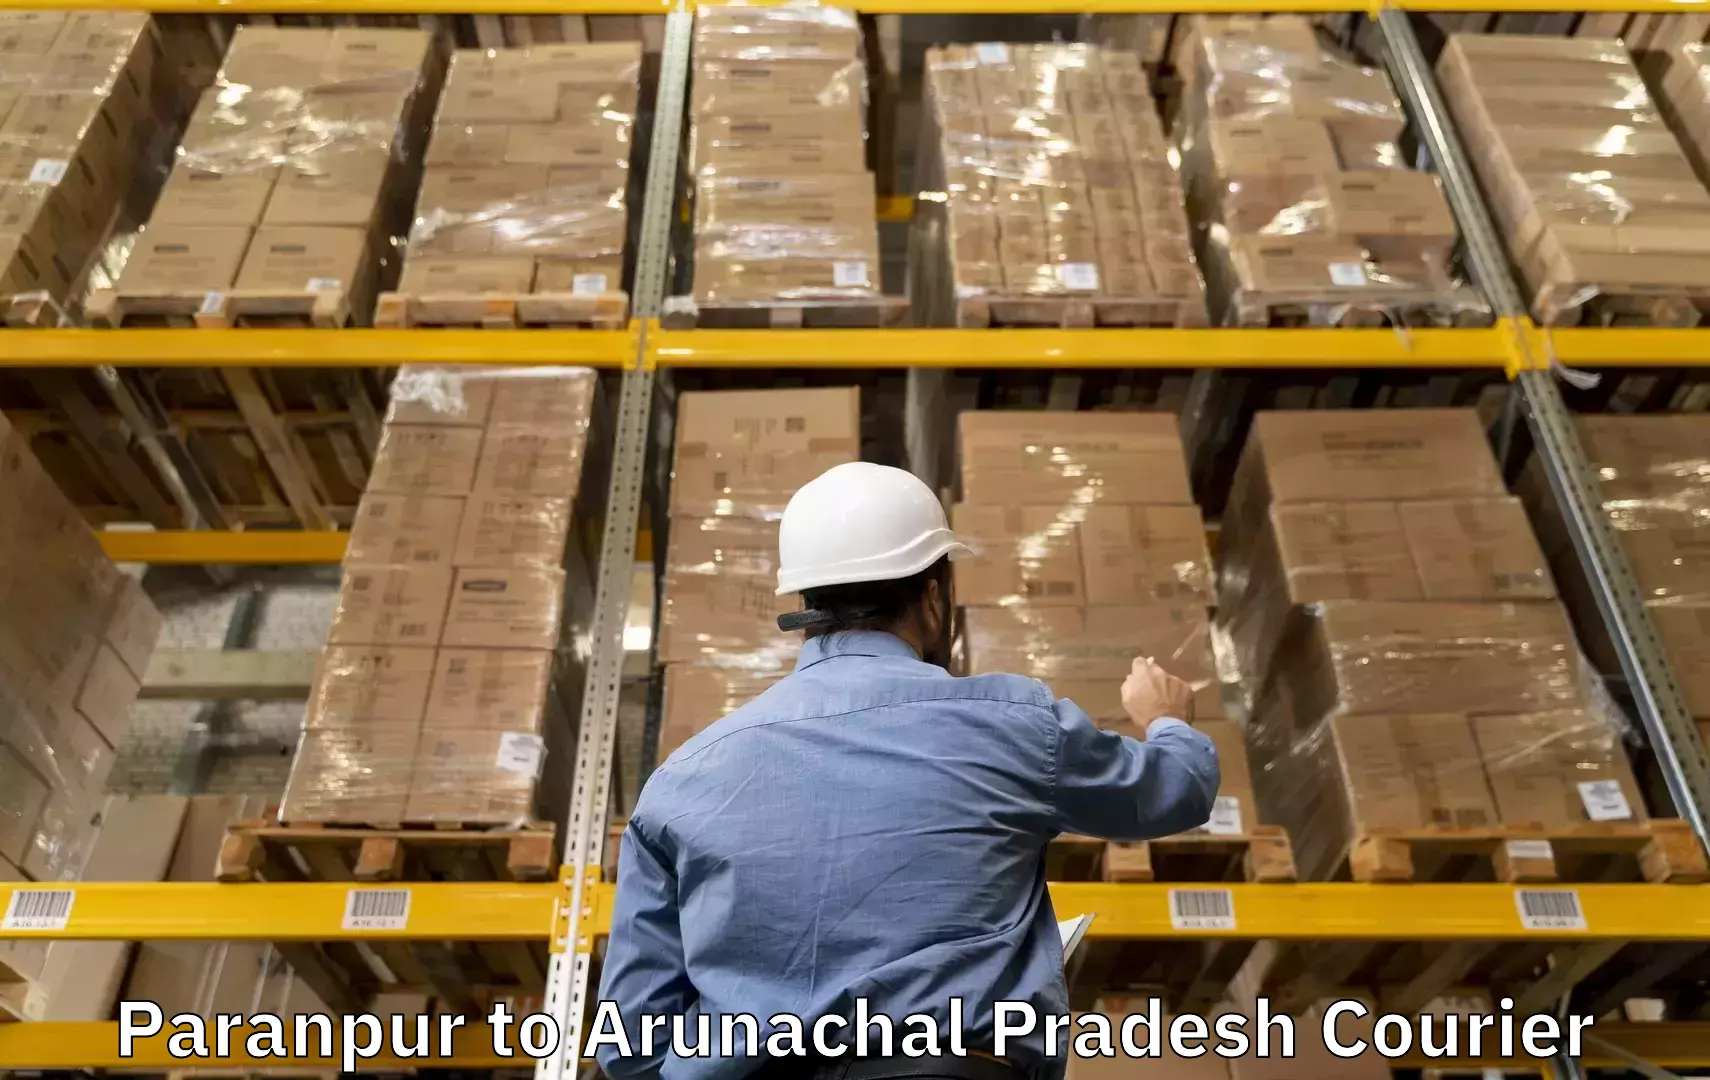 Luggage shipping specialists Paranpur to Jairampur